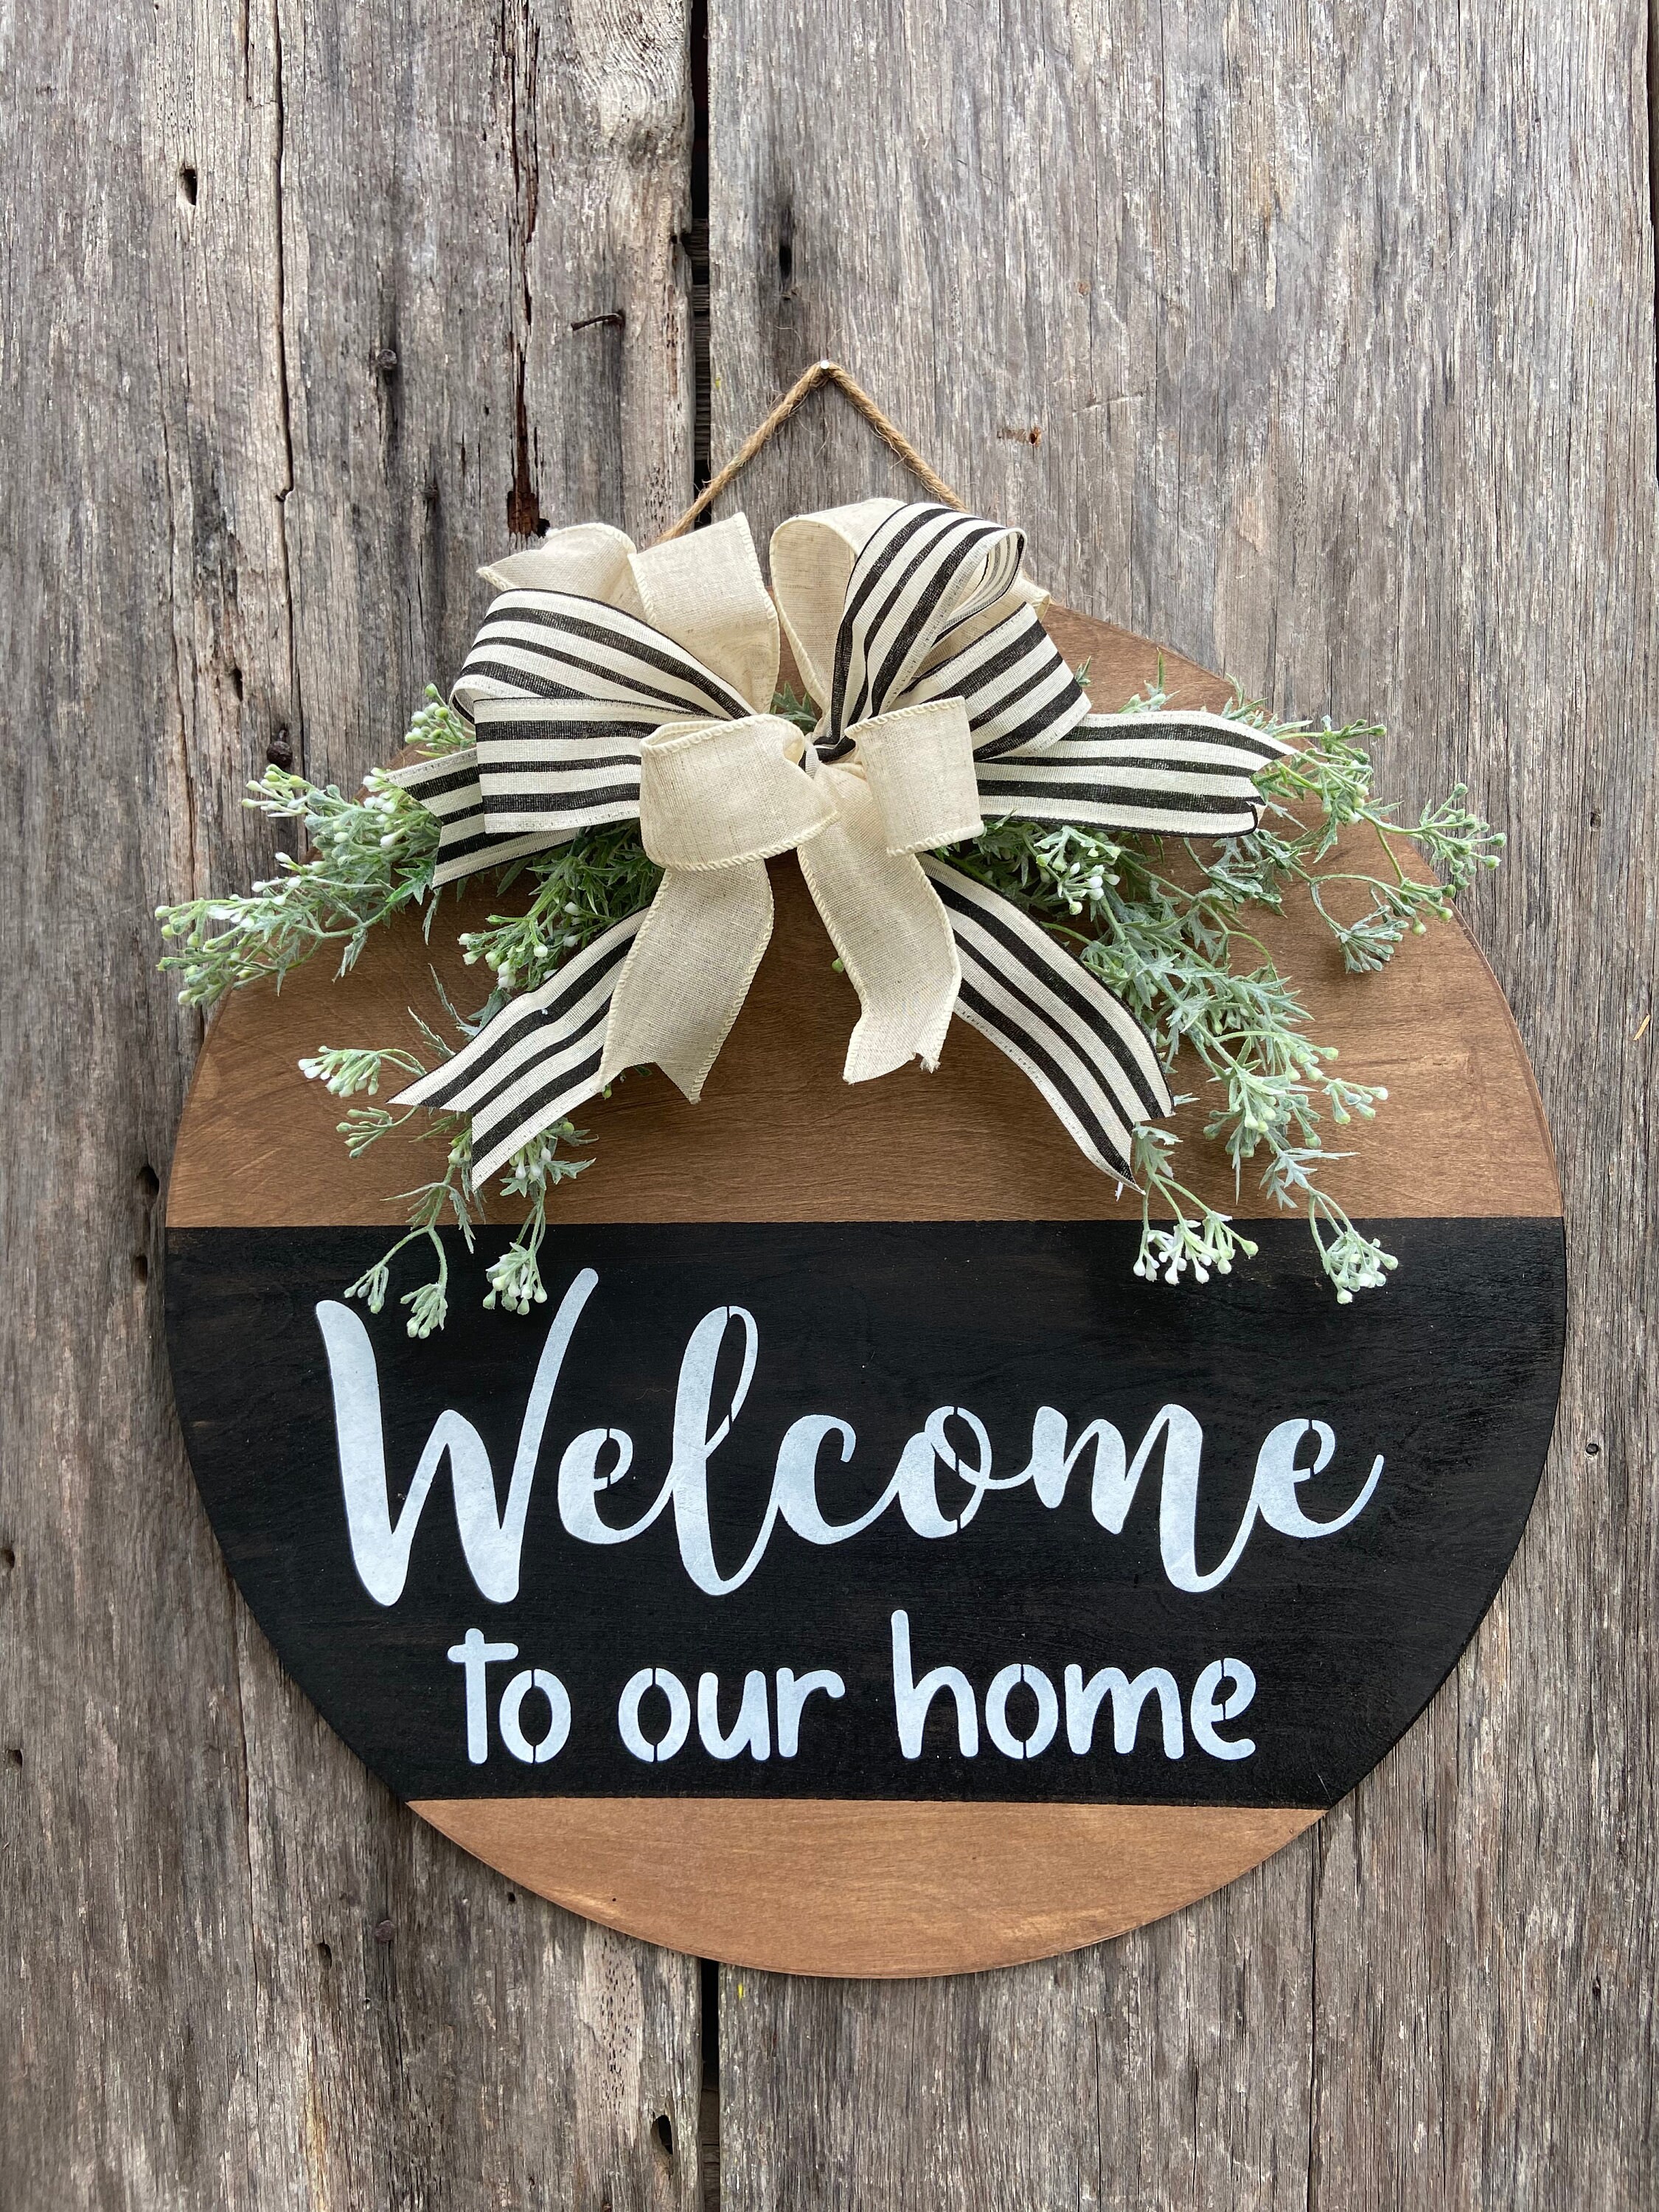 Welcome to Our Home Door Hanger / Farm House Decor | Etsy